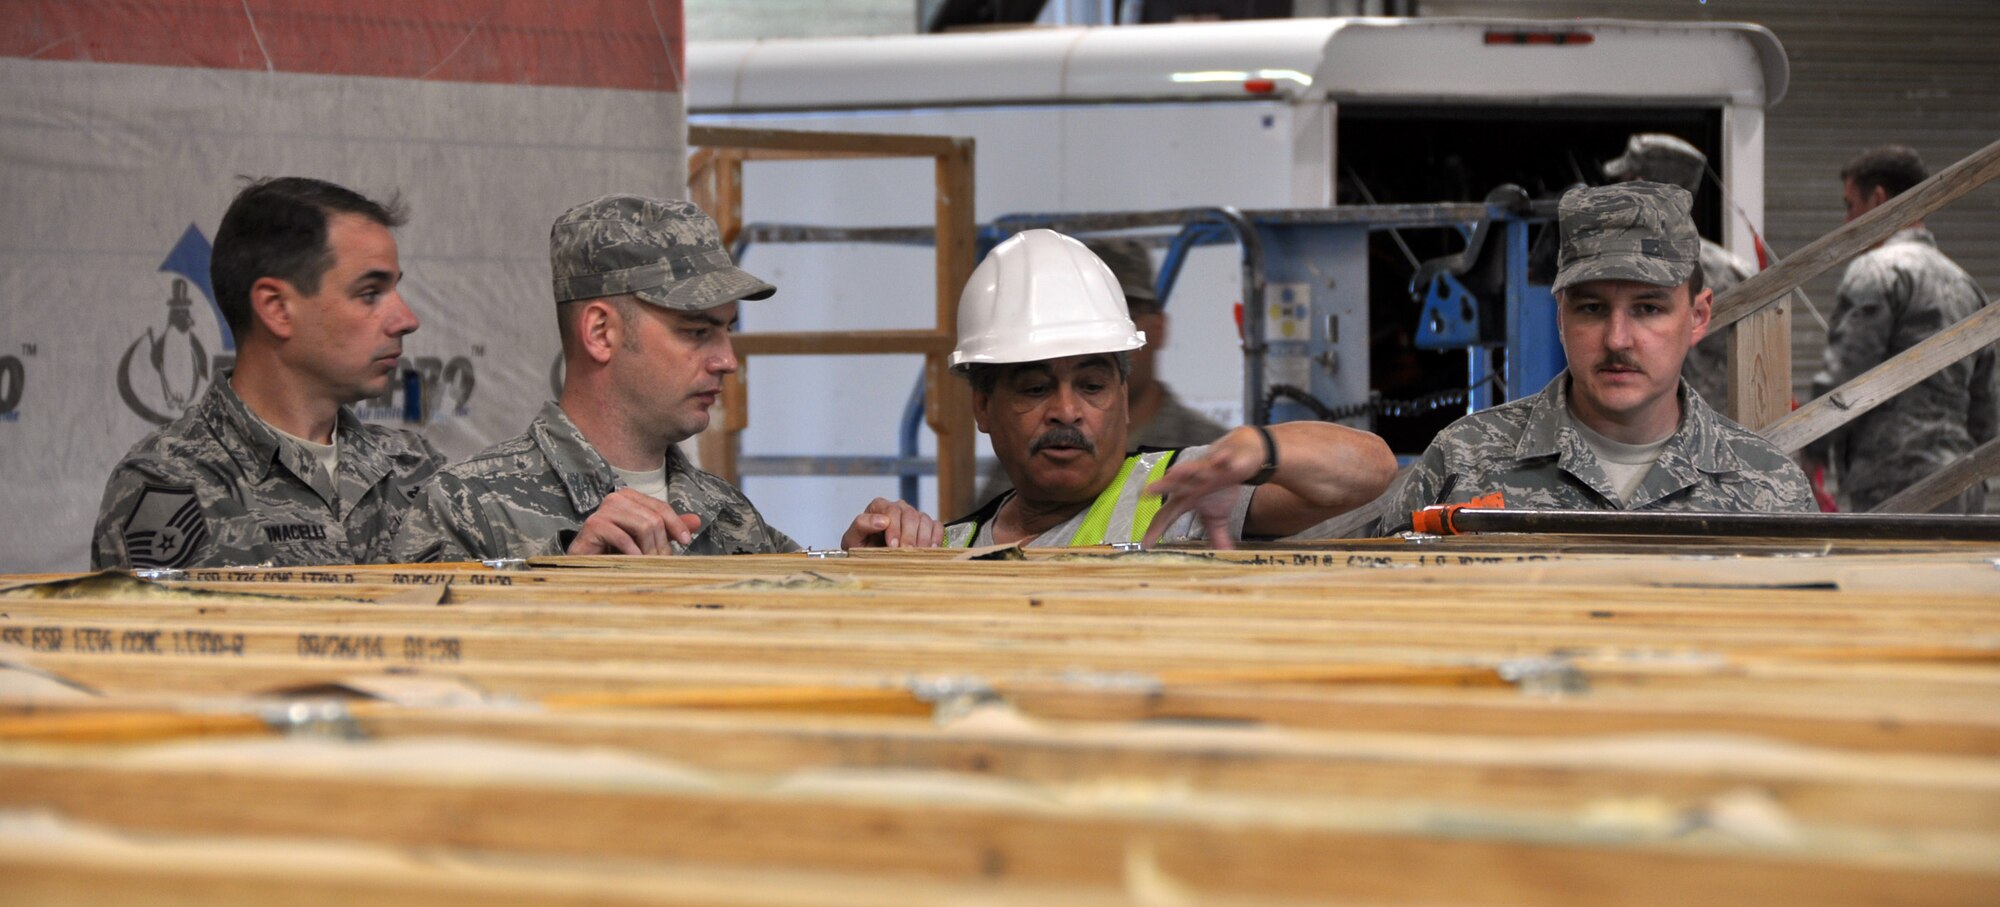 Members of the 911th Civil Engineer Squadron talk with Albert Prieto, the construction project manager of the Southwest Indian Foundation’s Veterans Vocational Center, about construction plans as part of Operation Footprint in Gallup, New Mexico, April 20, 2015. The civil engineers will be in Gallup for approximately two weeks participating in the construction for the underprivileged of the Navajo Nation. (Photo by Senior Airman Joseph E. Bridge)